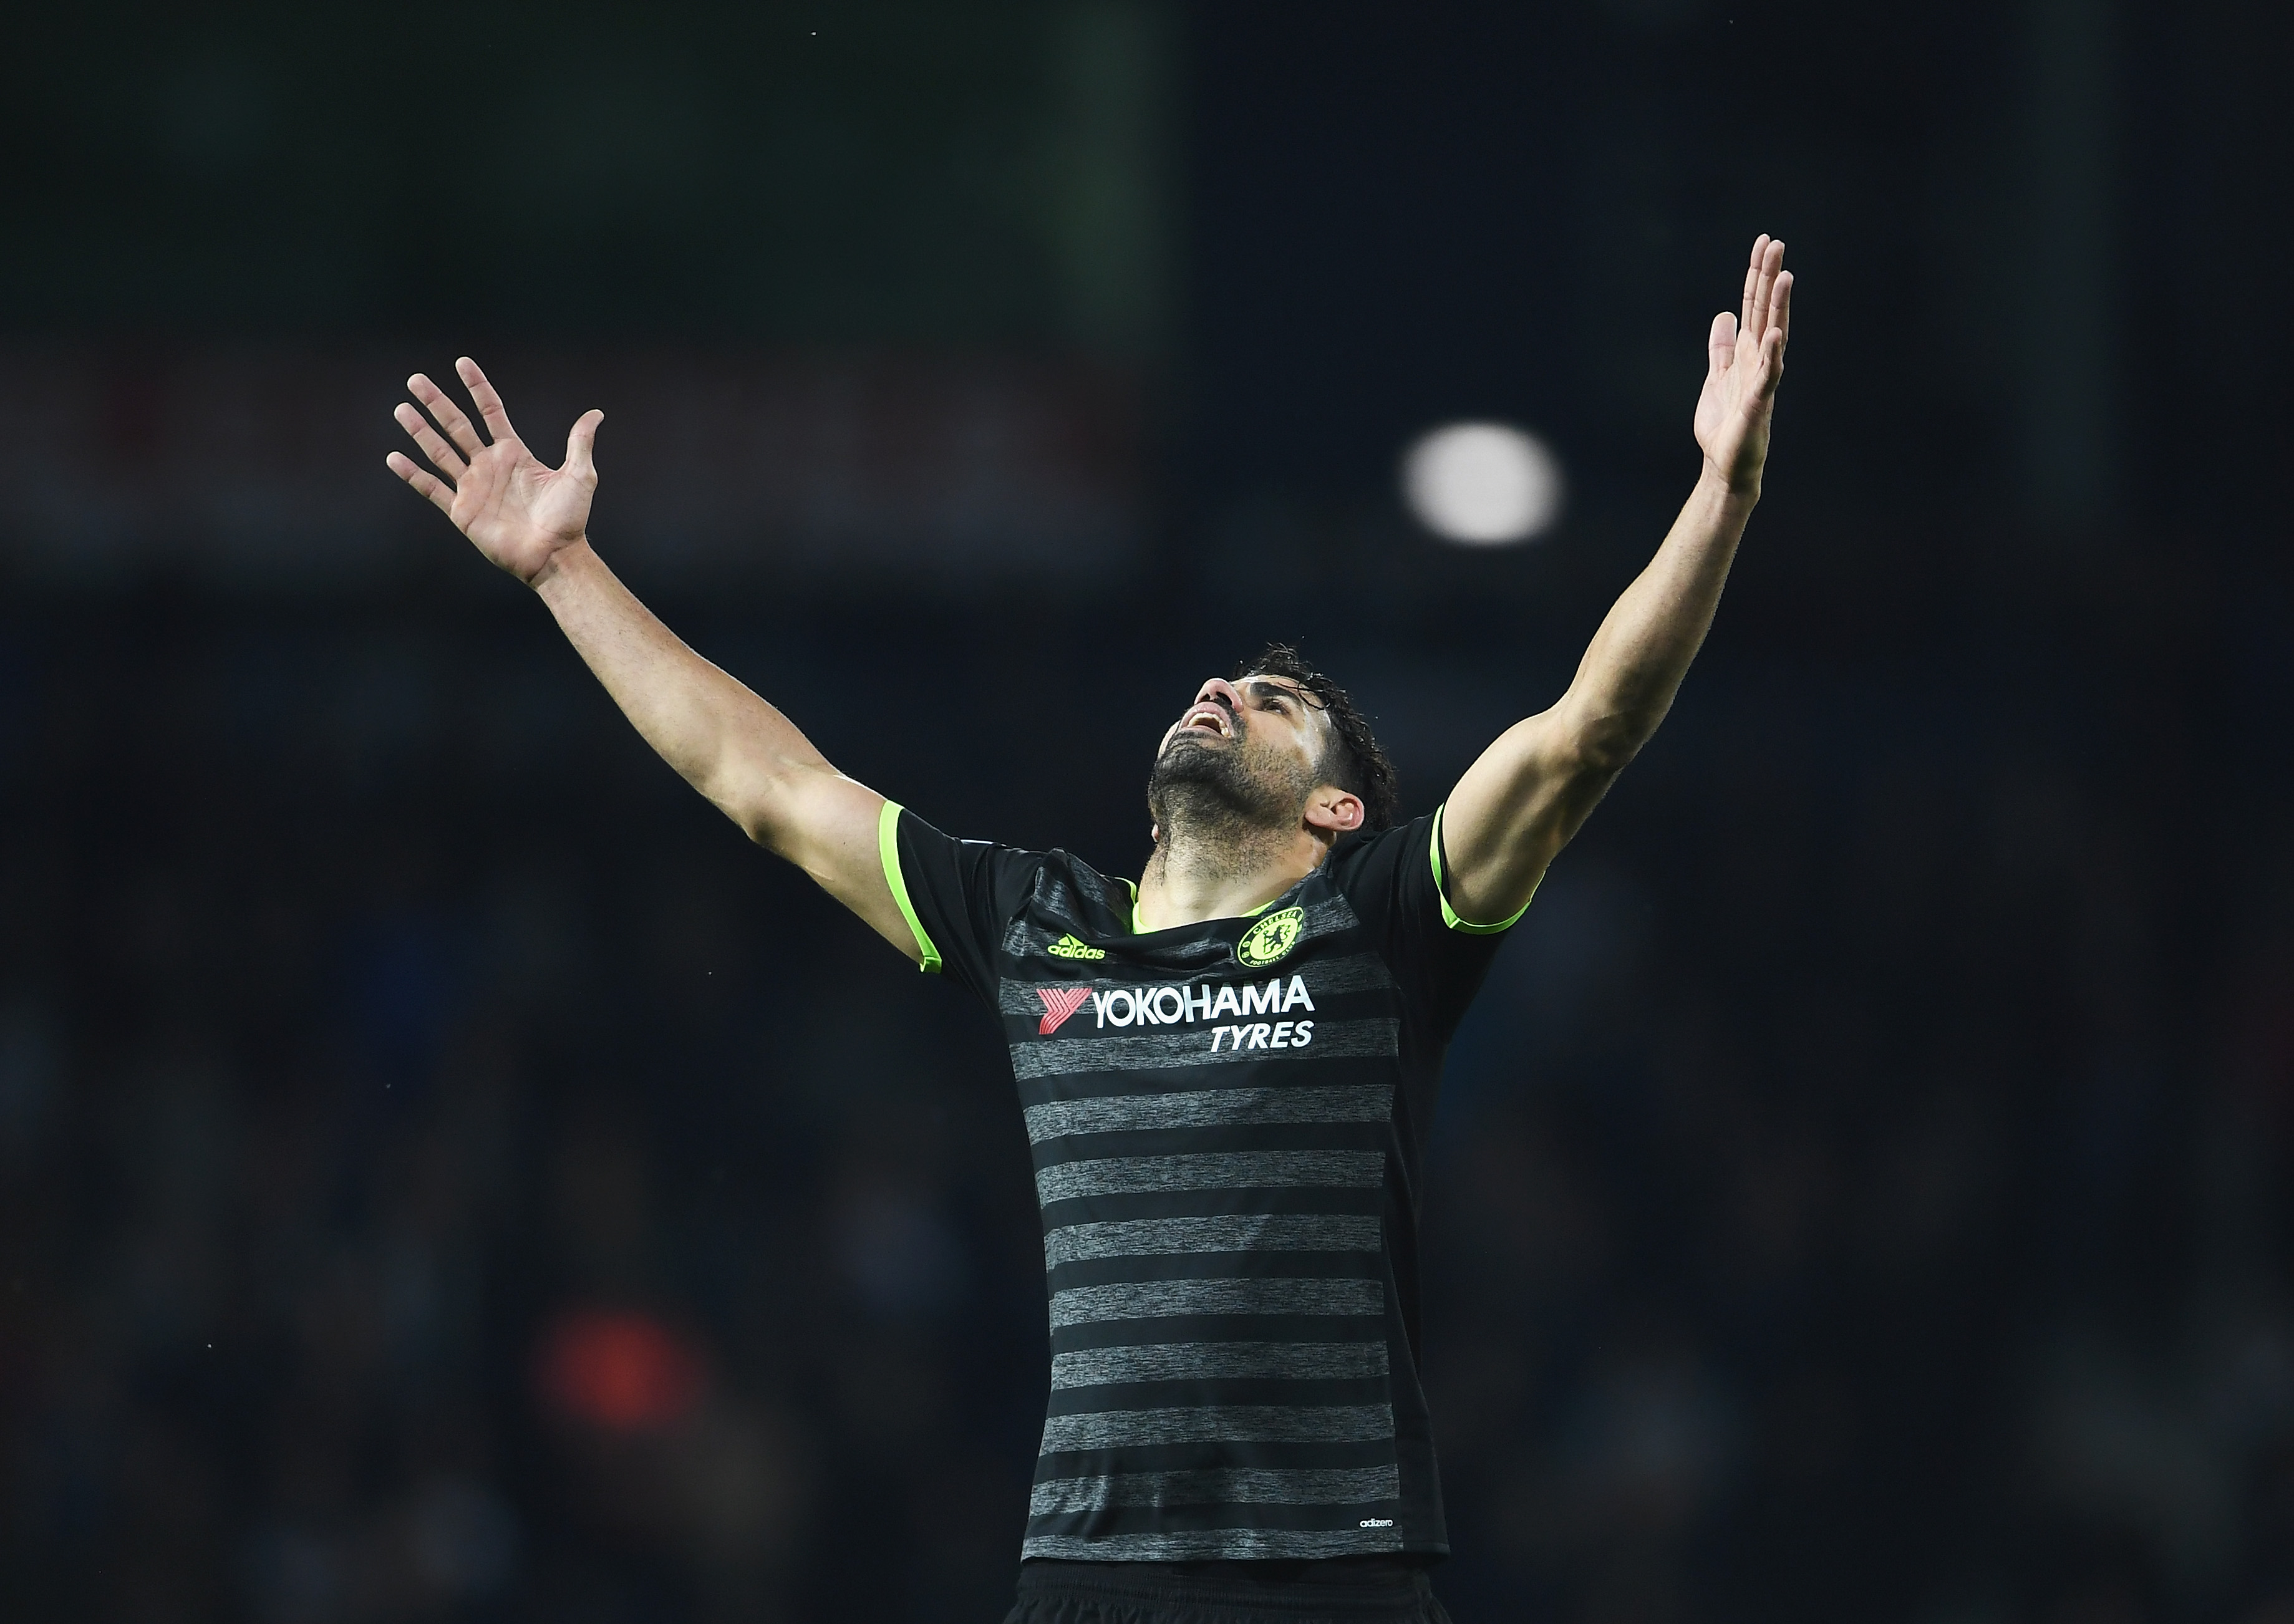 WEST BROMWICH, ENGLAND - MAY 12:  Diego Costa of Chelsea celebrates winning the league after the Premier League match between West Bromwich Albion and Chelsea at The Hawthorns on May 12, 2017 in West Bromwich, England. Chelsea are crowned champions after a 1-0 victory against West Bromwich Albion.  (Photo by Laurence Griffiths/Getty Images)